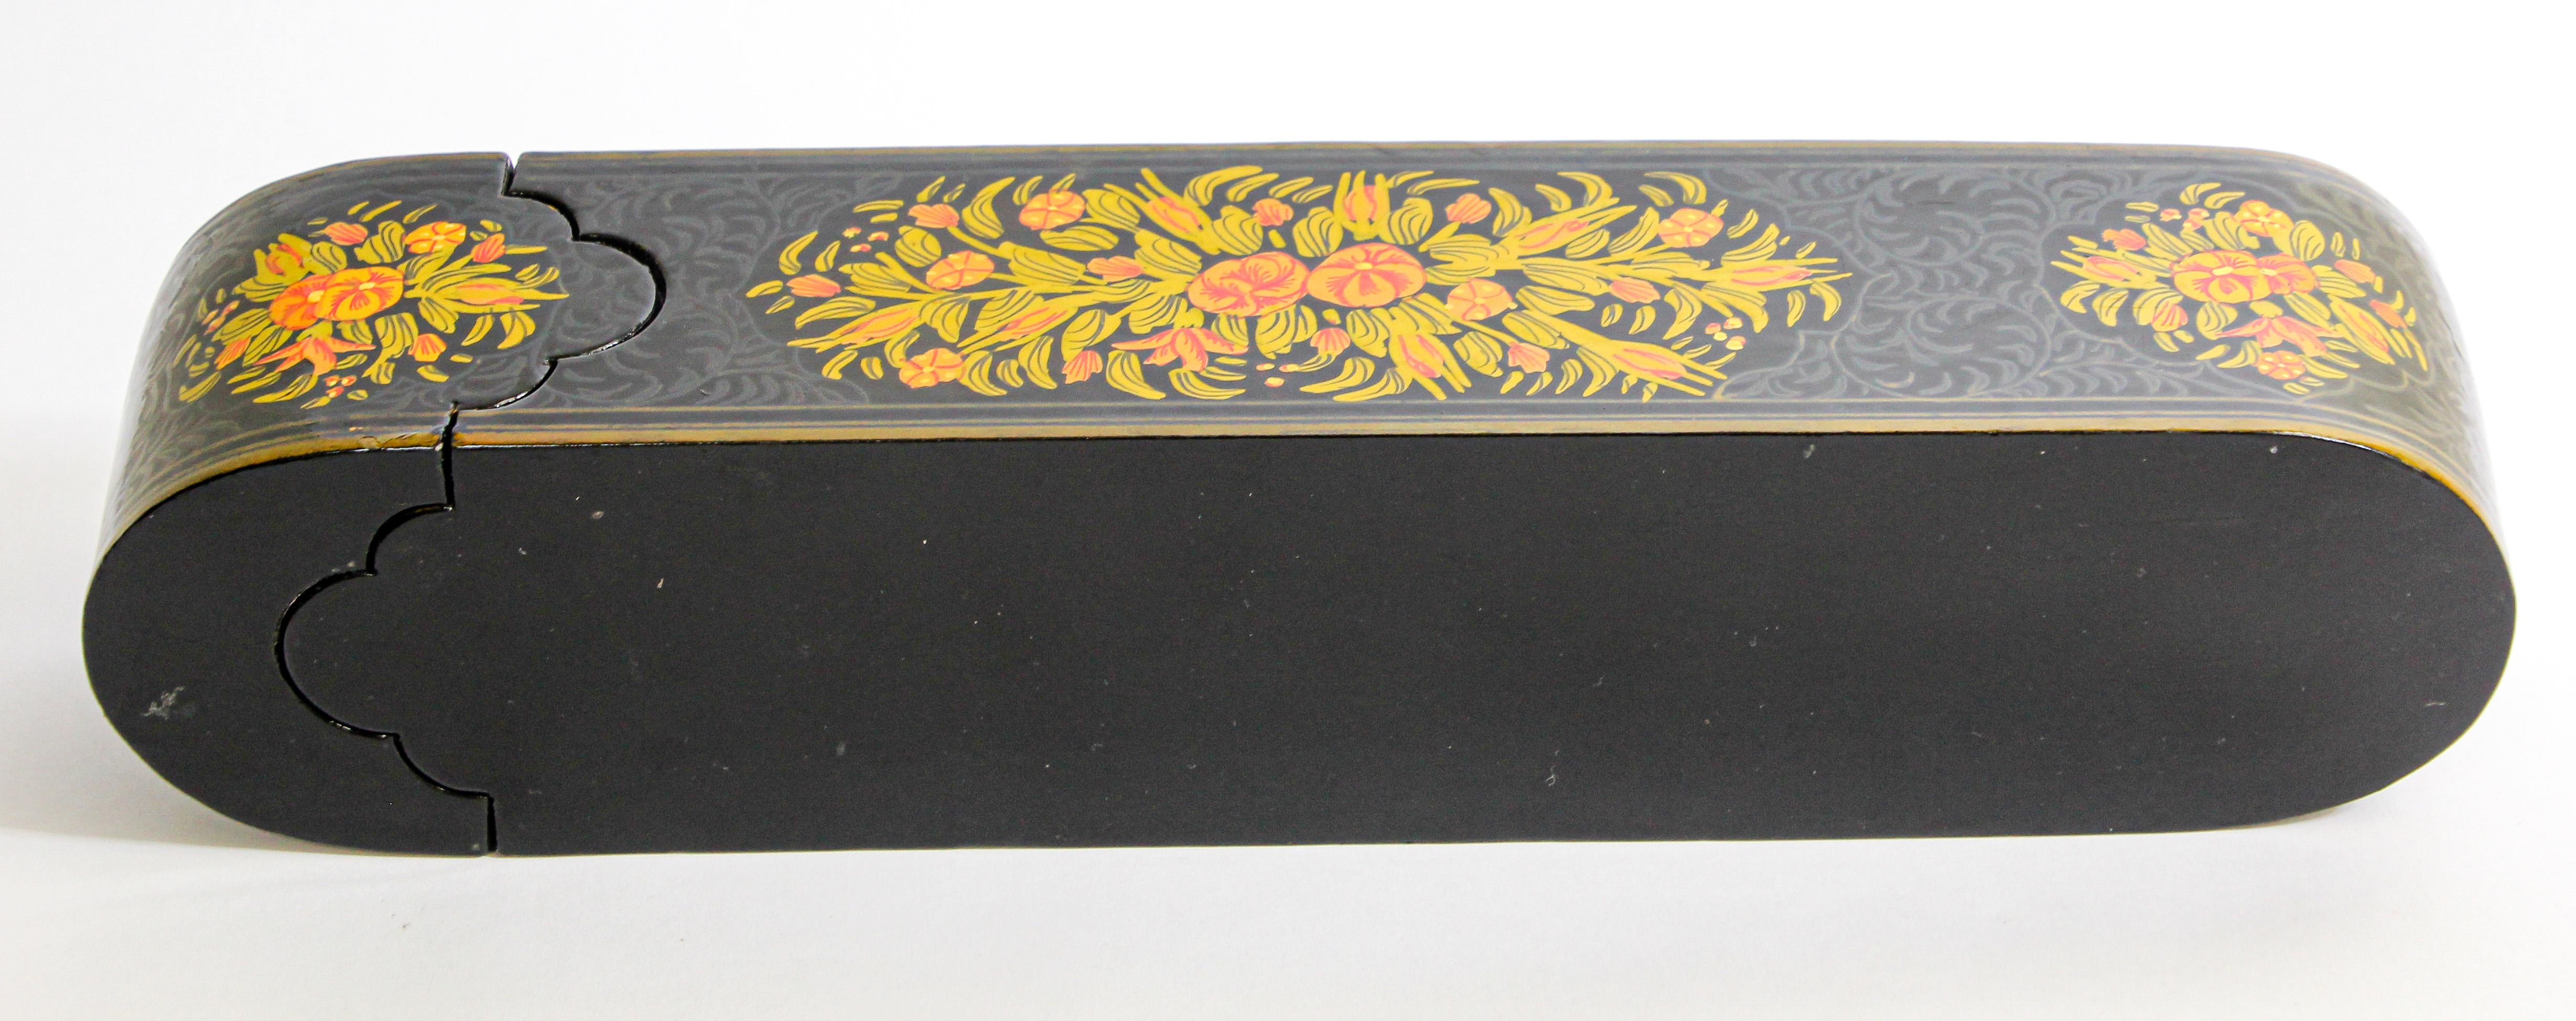 Indo Persian Lacquer Pen Box Hand Painted with Floral Design 5